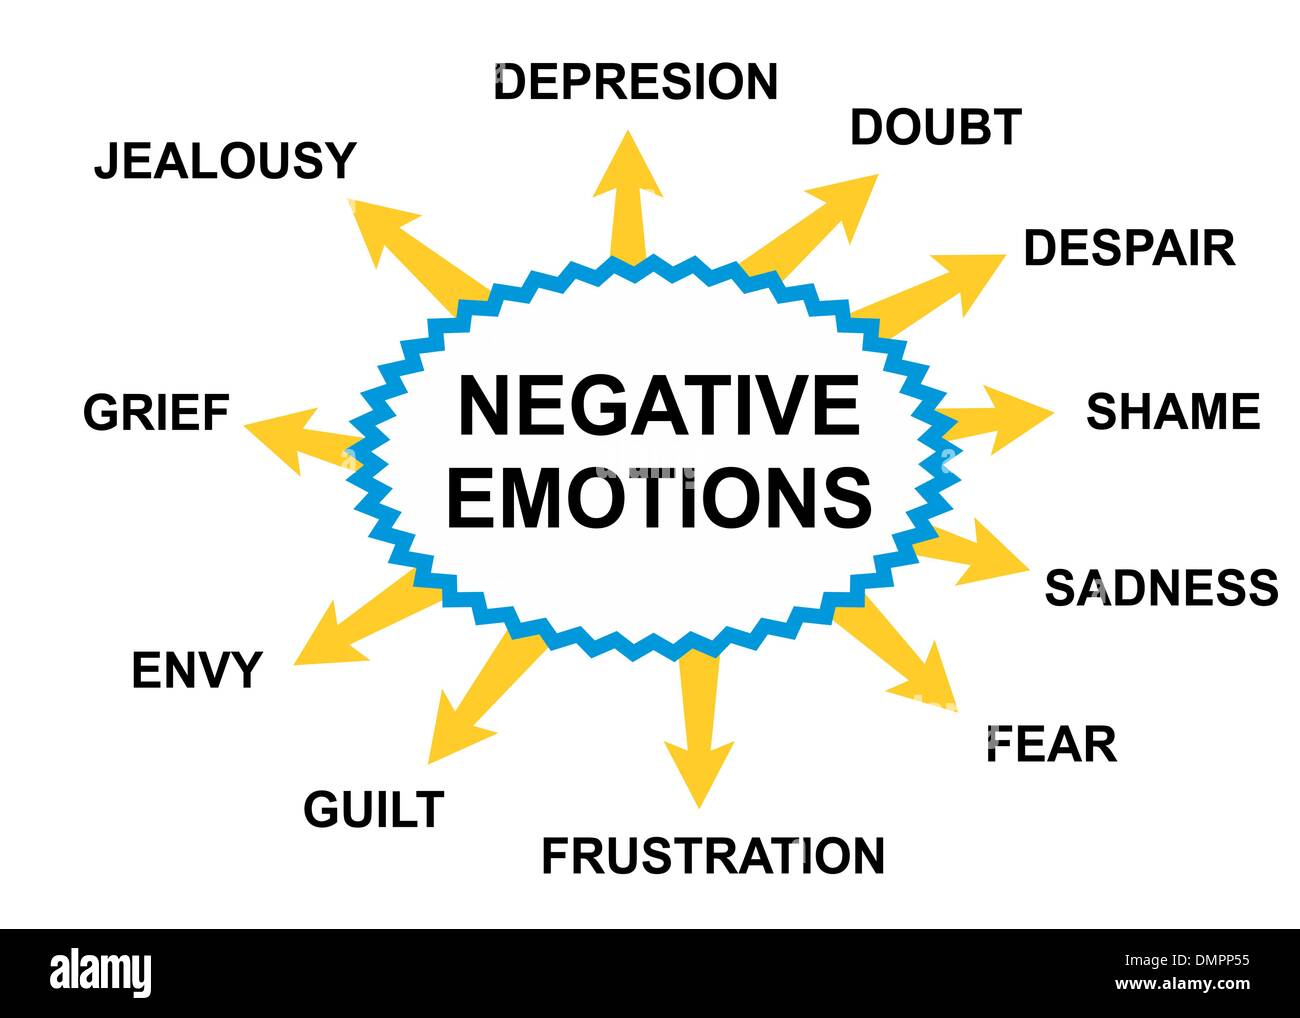 Positive And Negative Emotions Chart